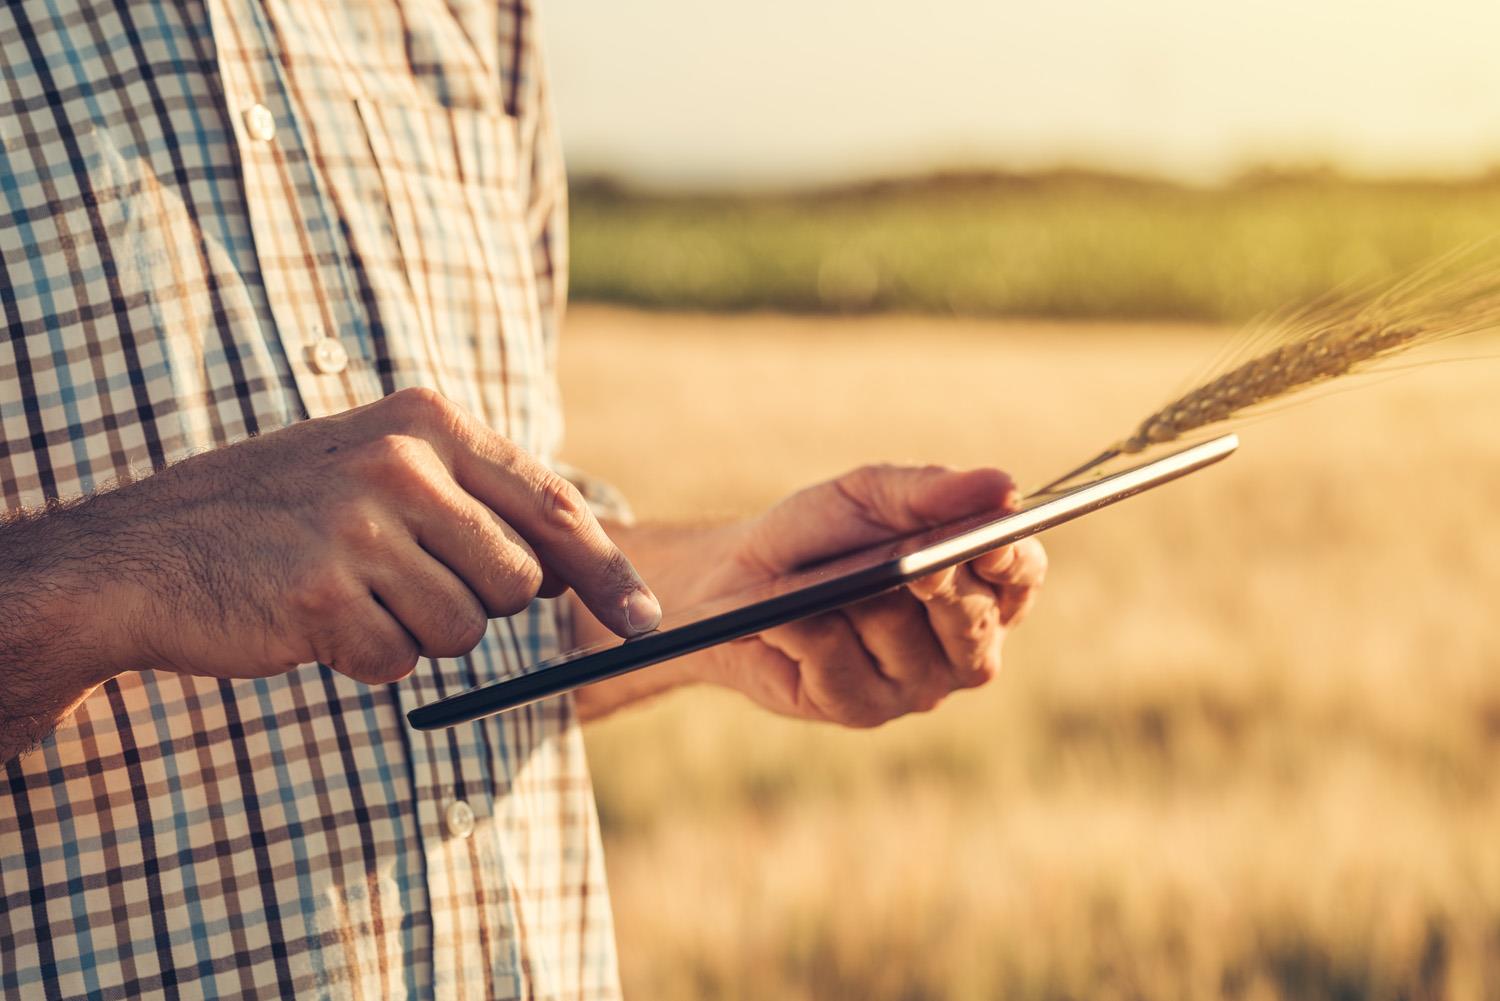 Farmer in a field typing on a tablet and holding a piece of wheat.